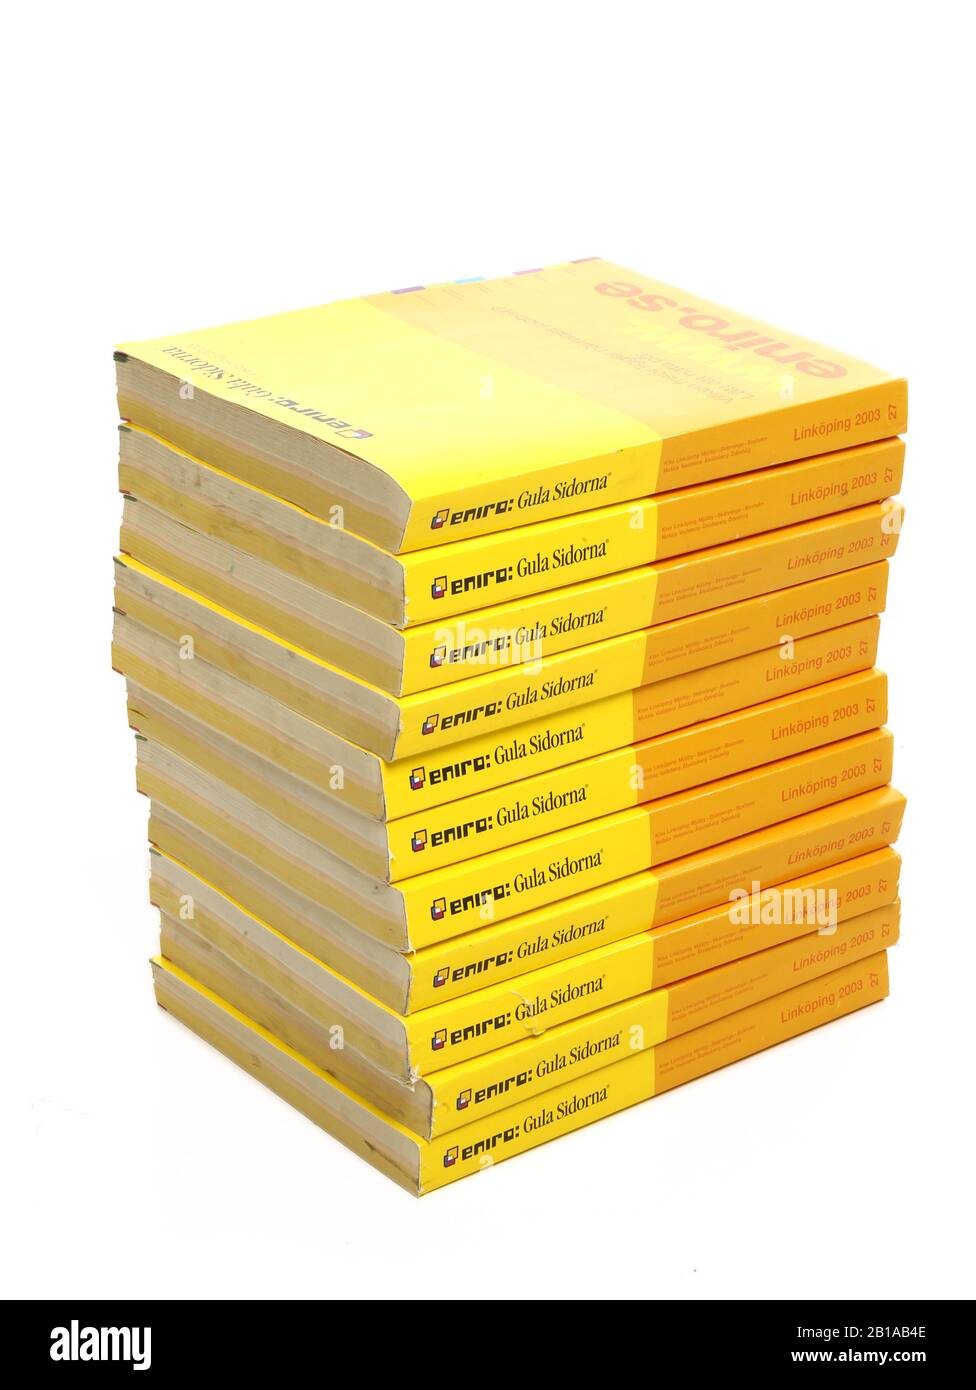 Telephone directories from Eniro. Photo Jeppe Gustafsson Stock Photo